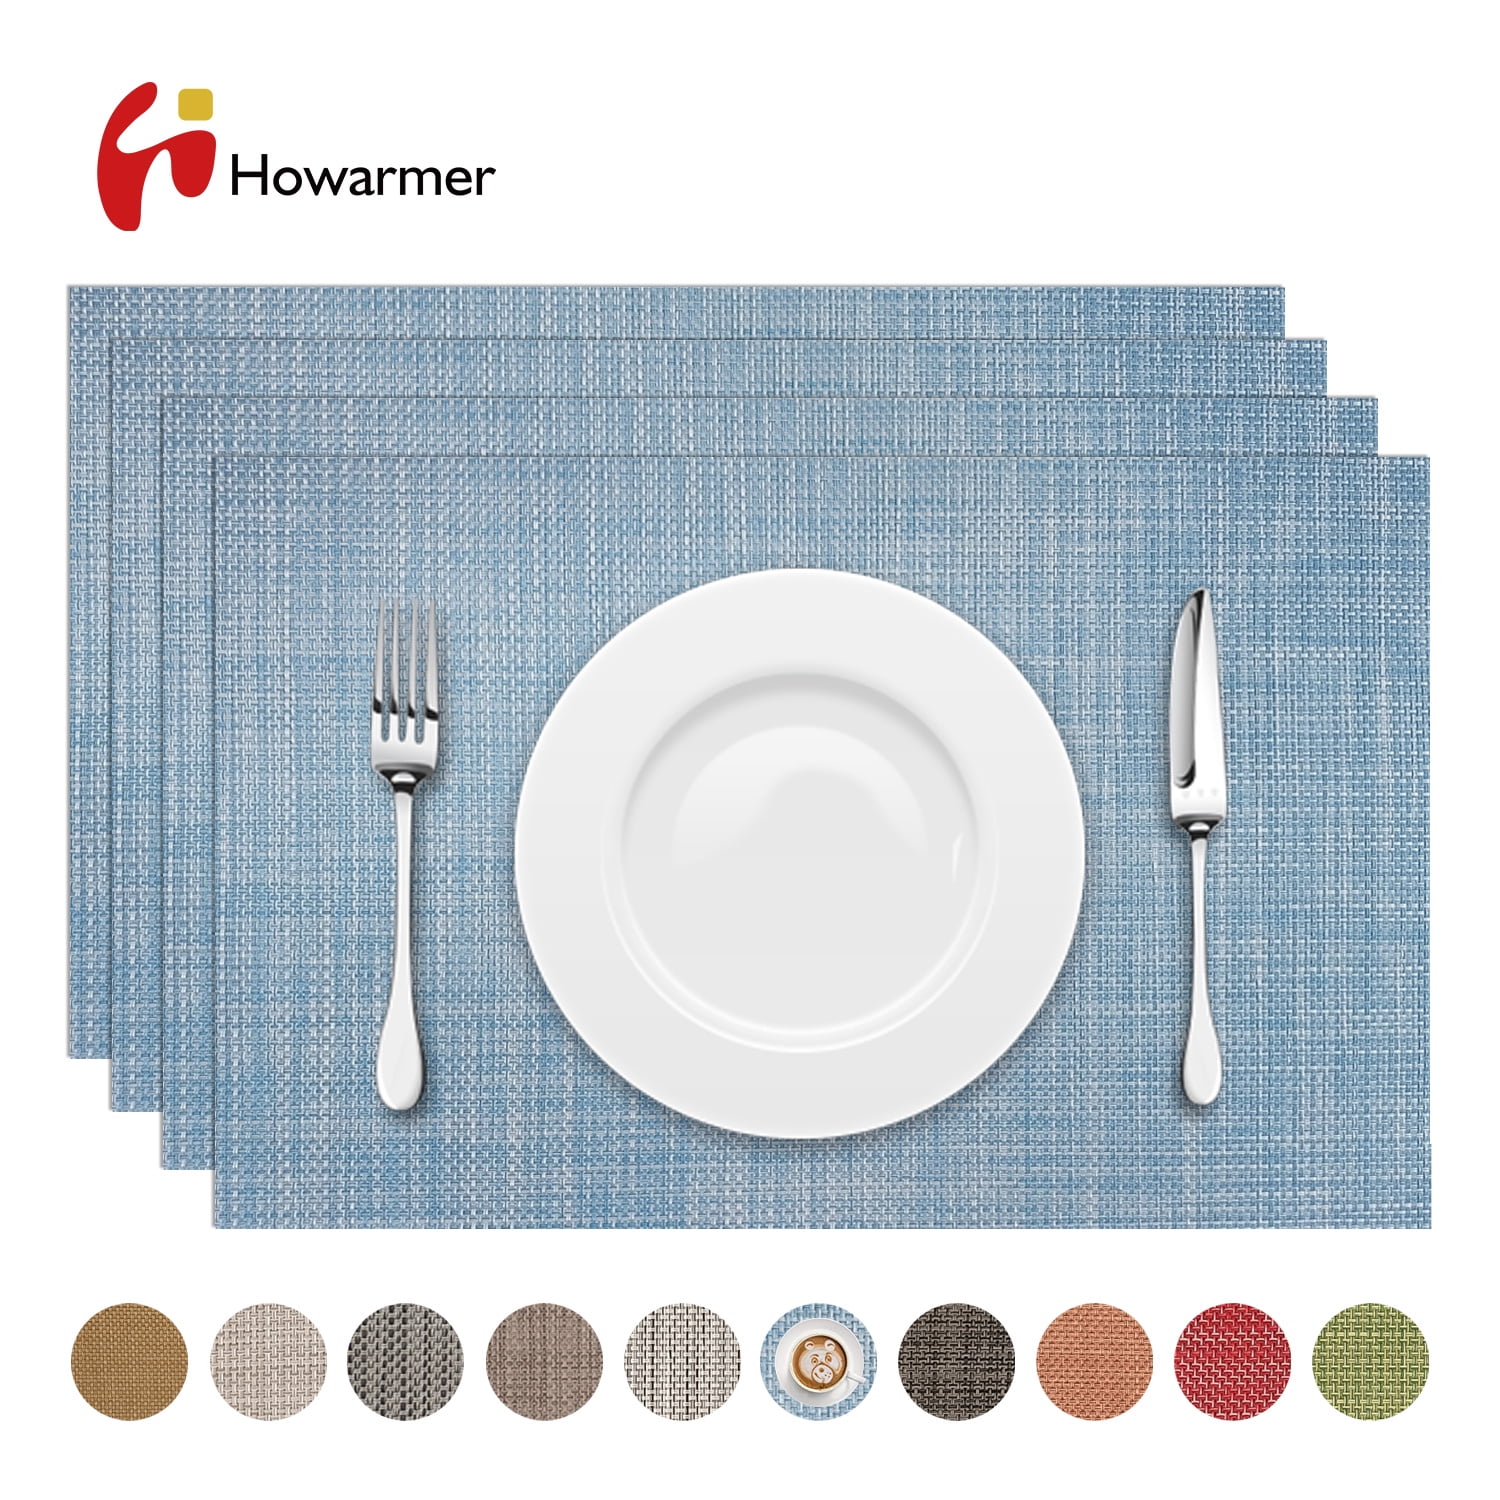 Howarmer Vinyl Woven Placemats for Dining Table, 12x18 Inch Rectangle  Washable PVC Placemats Anti-Slip Heat Resistant Kitchen Table Mats Easy to